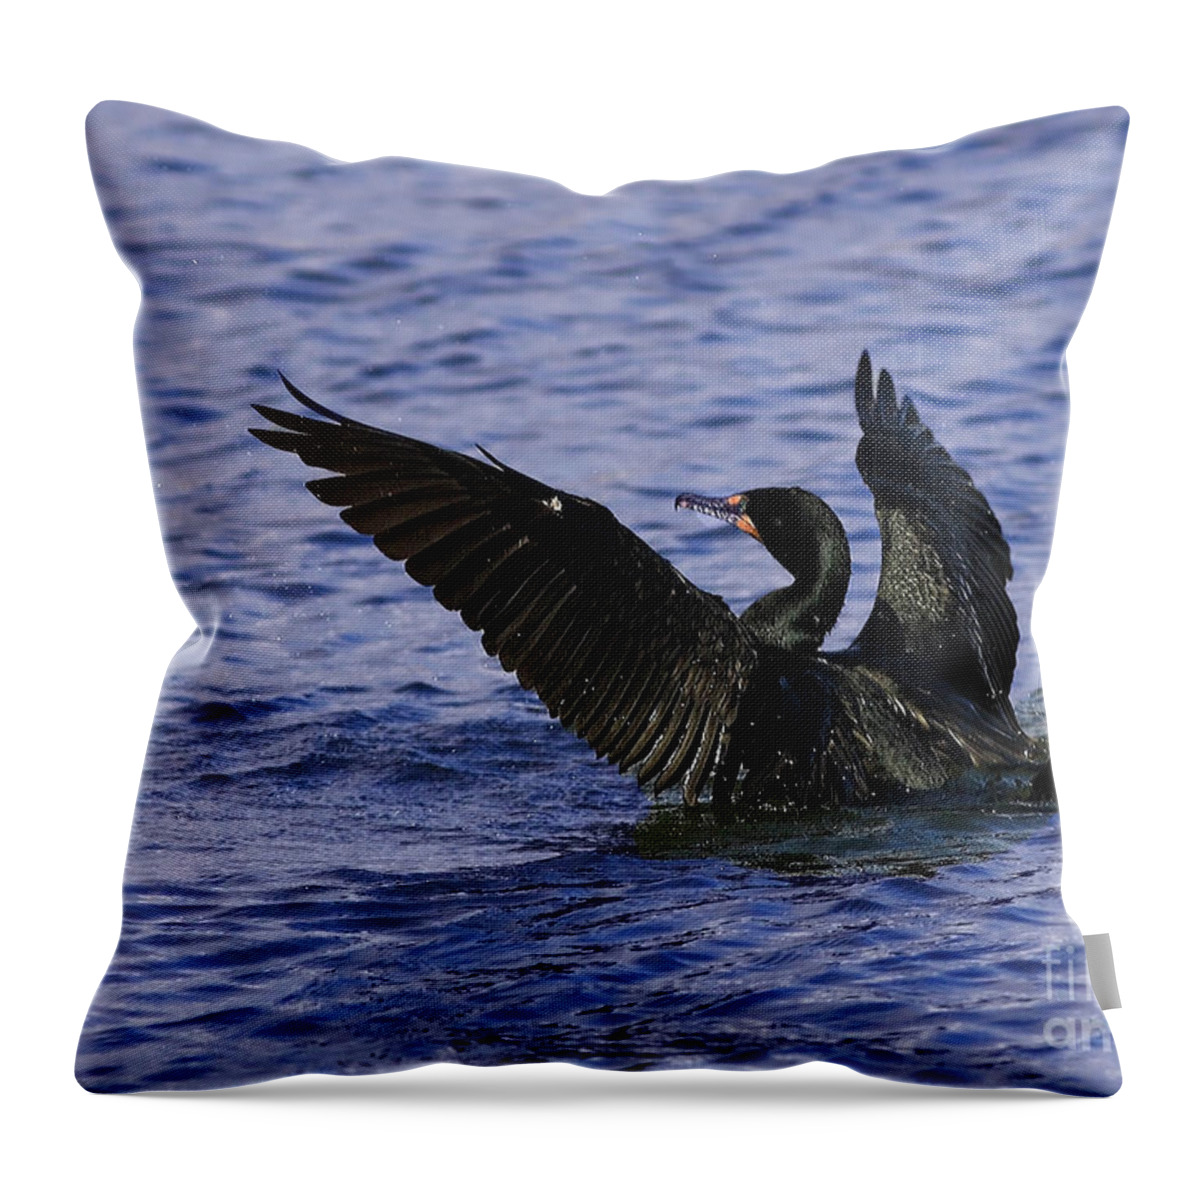 Cormorant Prepares For Flight Throw Pillow featuring the photograph Cormorant Prepares for Flight by Inspired Nature Photography Fine Art Photography